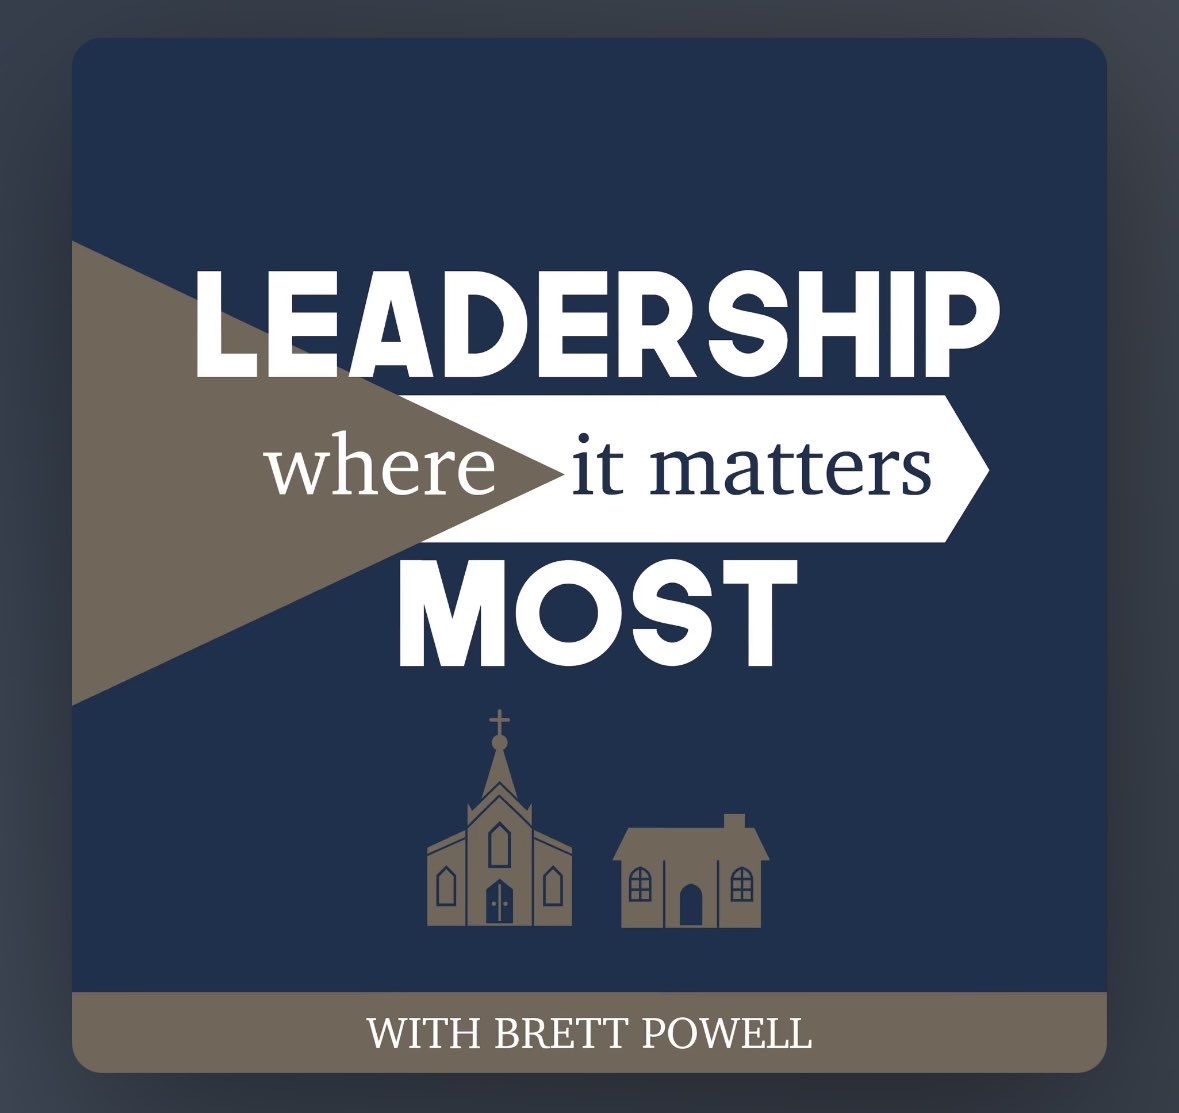 I highly recommend this podcast. Brett Powell on the family and the Church - the places where leadership matters most. Excellent and incredibly important content!